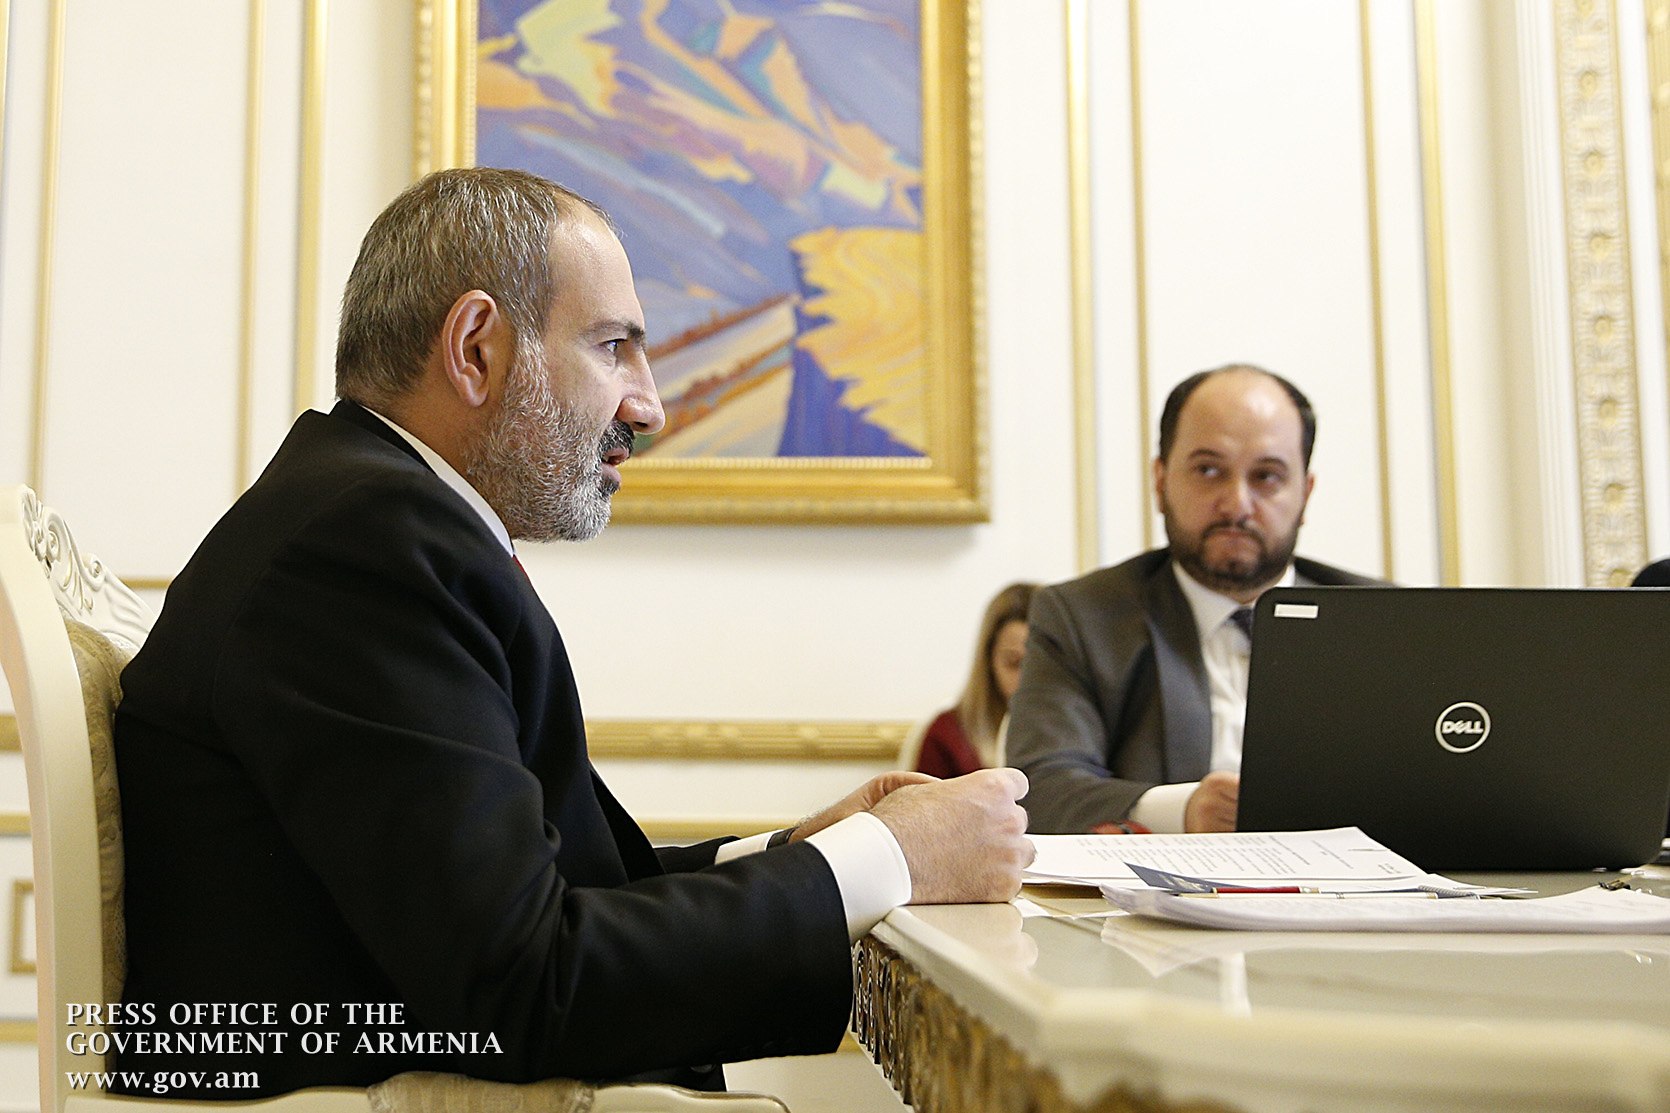 Nikol Pashinyan: “Government will make principled, decisive and consistent changes in the field of education and science”